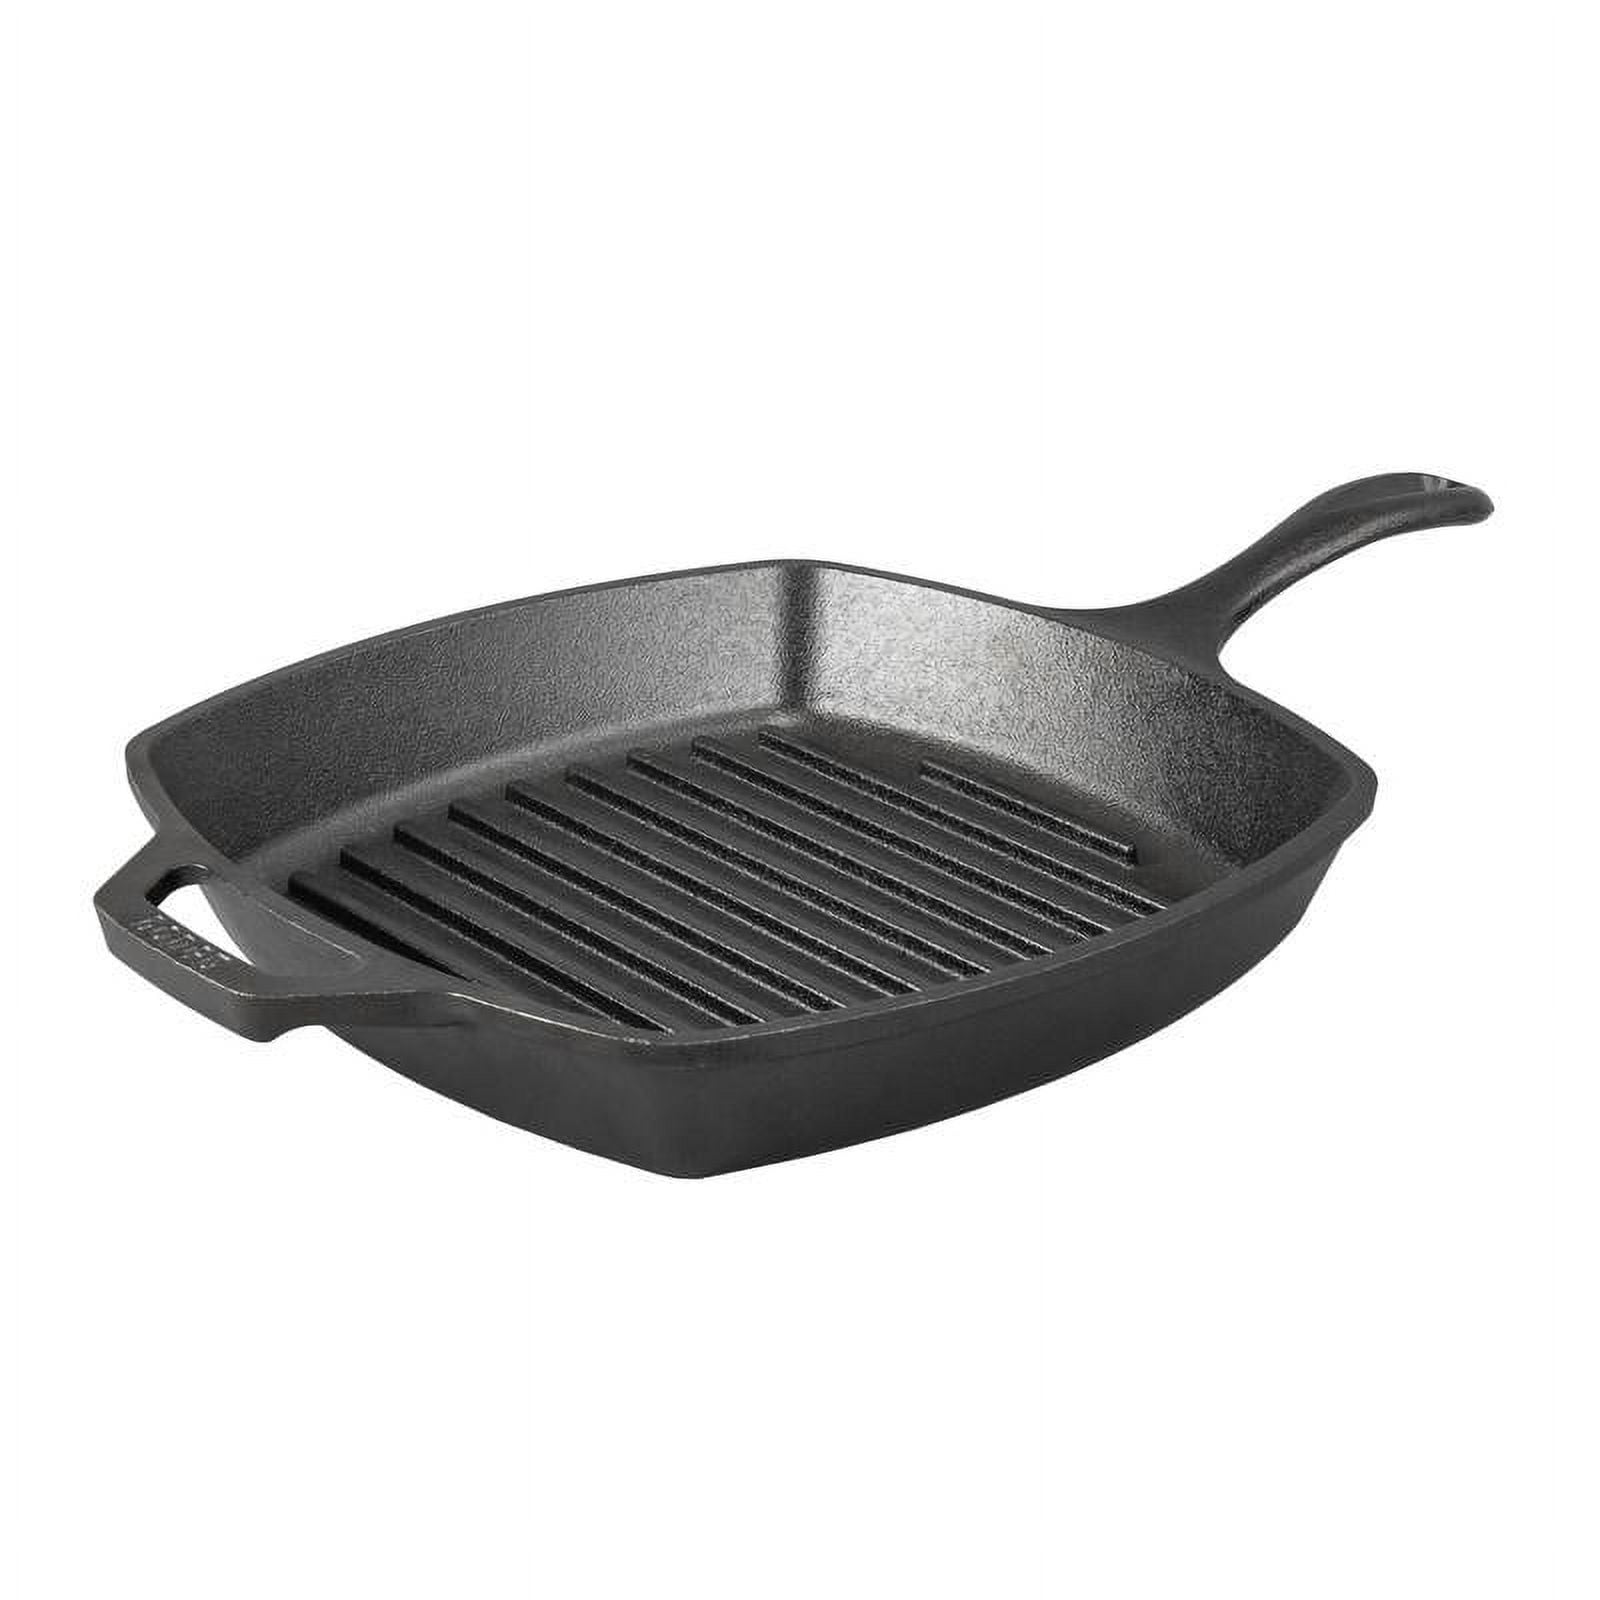 Lodge 3-Piece Pre-Seasoned Cast Iron Skillet Set - Includes 10 1/4 Skillet,  10 1/4 Grill Pan, and 10 1/2 Griddle